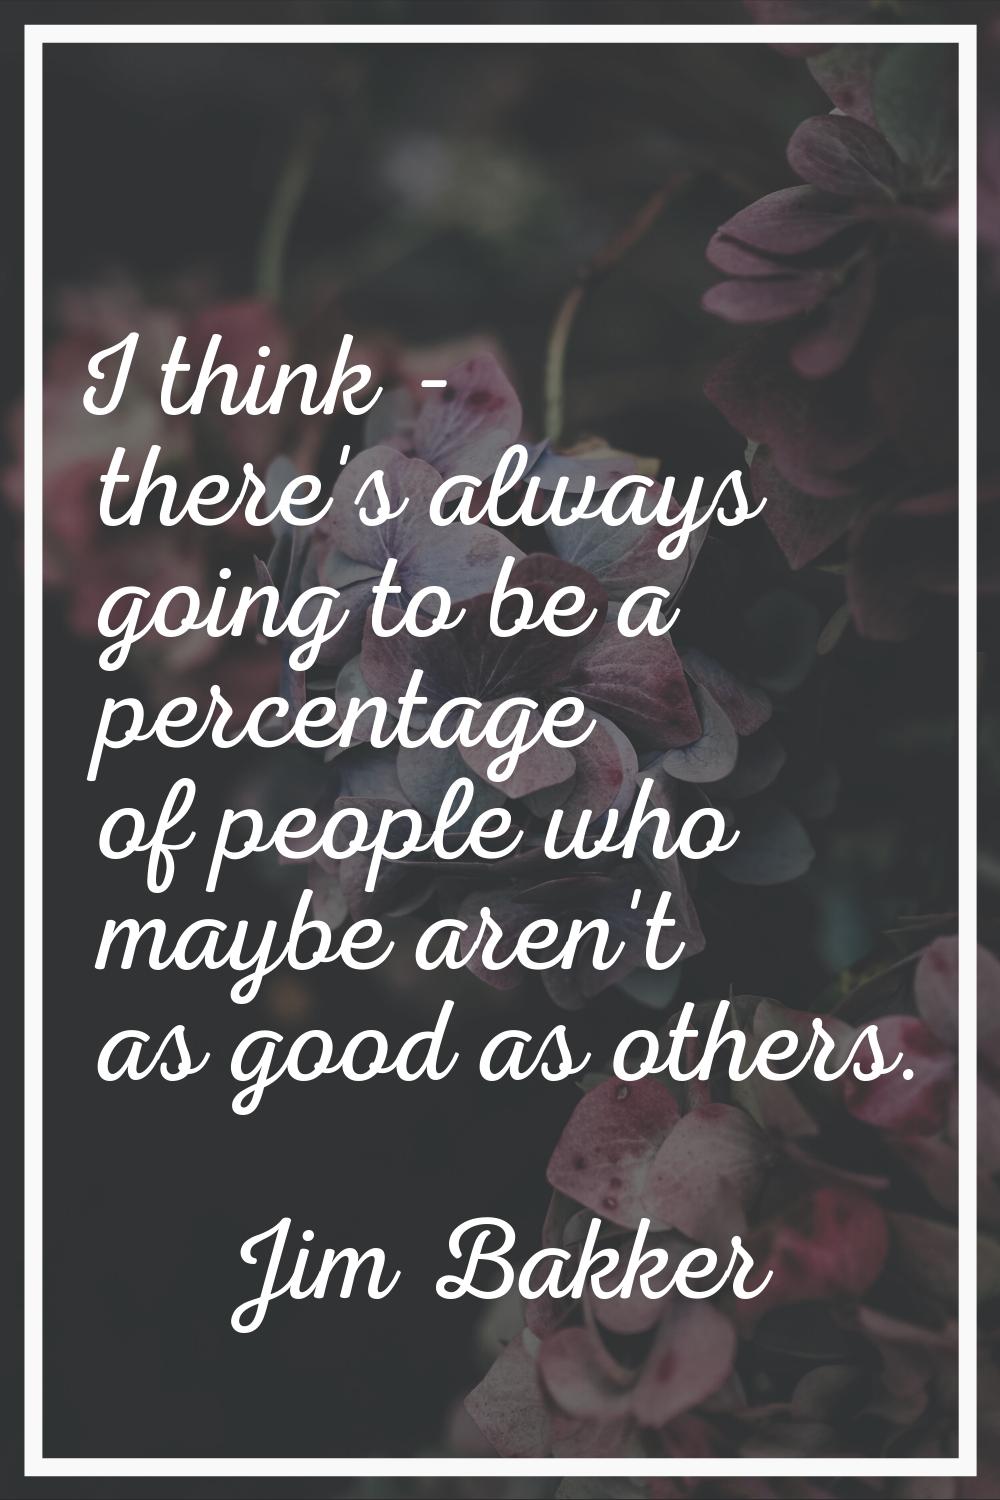 I think - there's always going to be a percentage of people who maybe aren't as good as others.